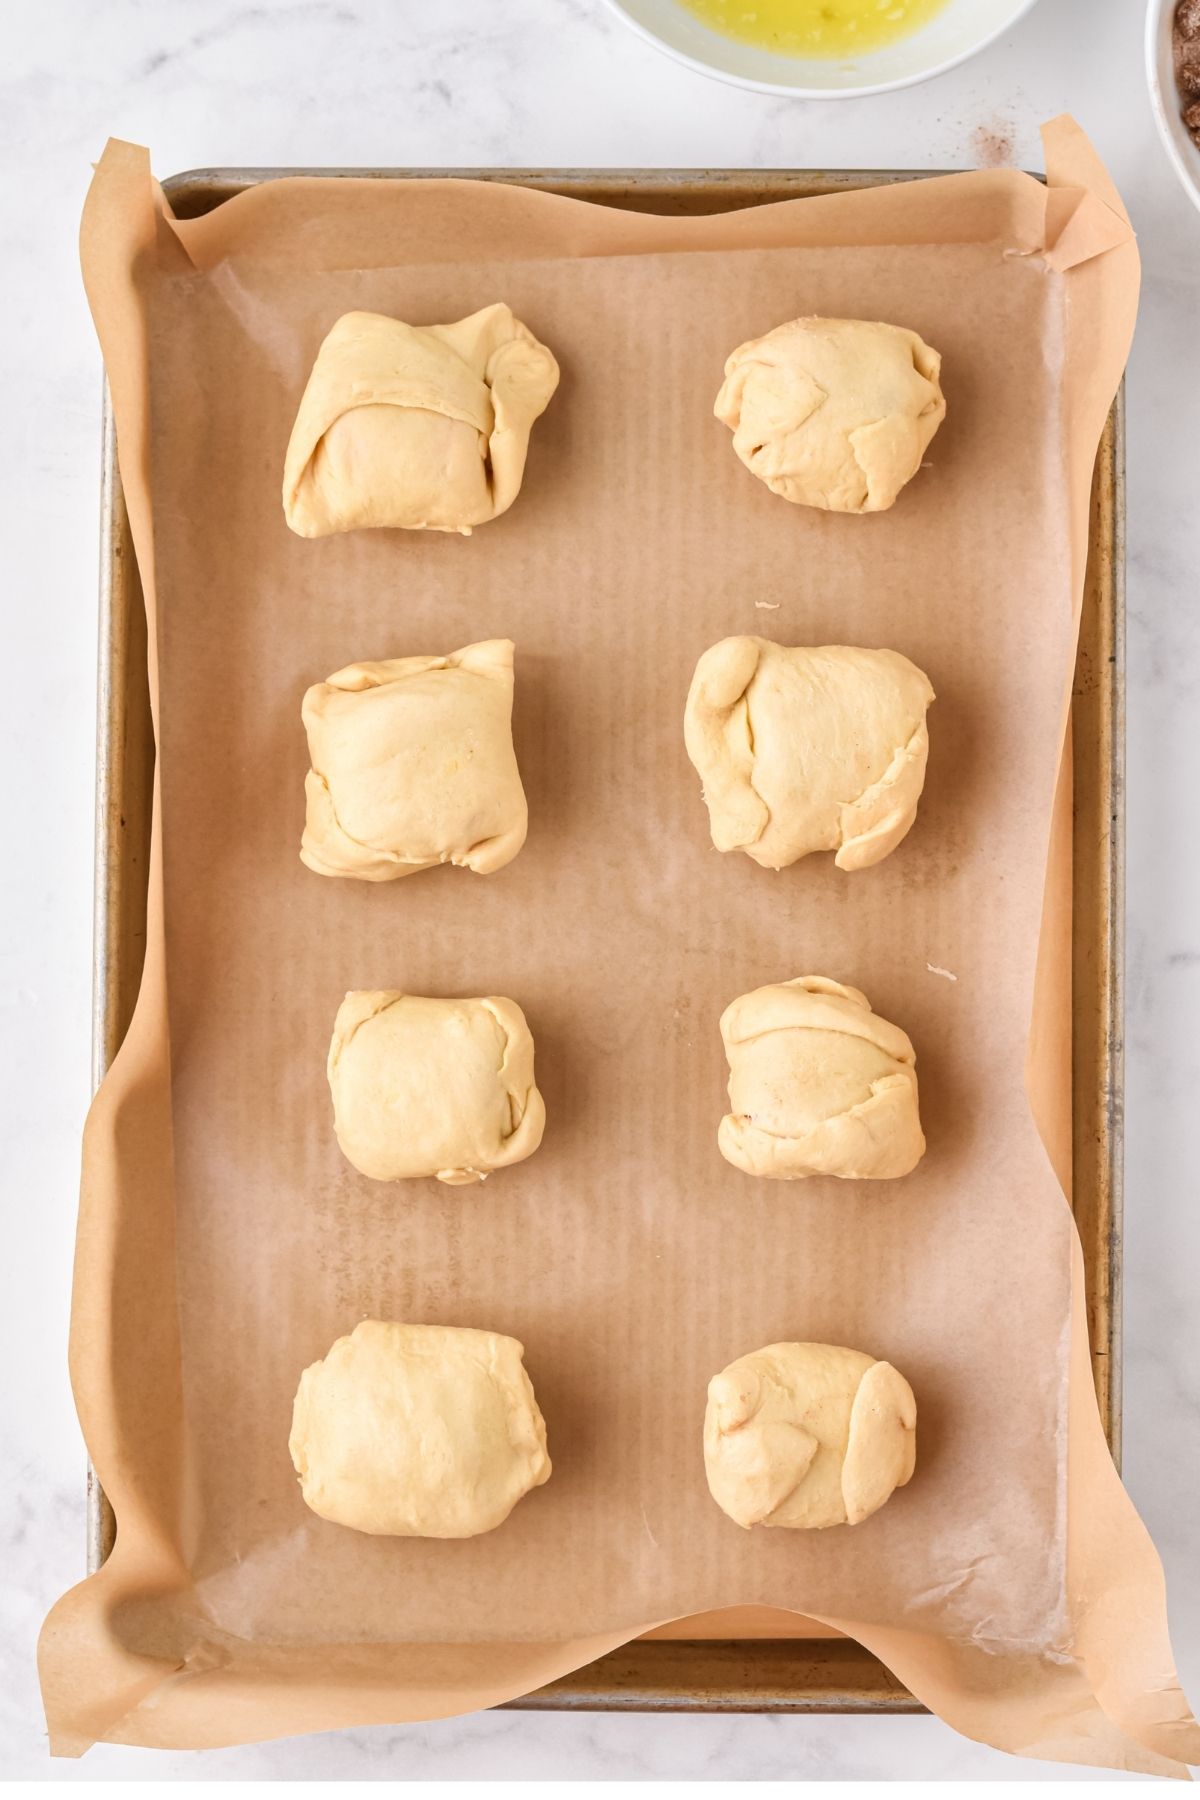 crescent rolls closed into round rolls on baking sheet